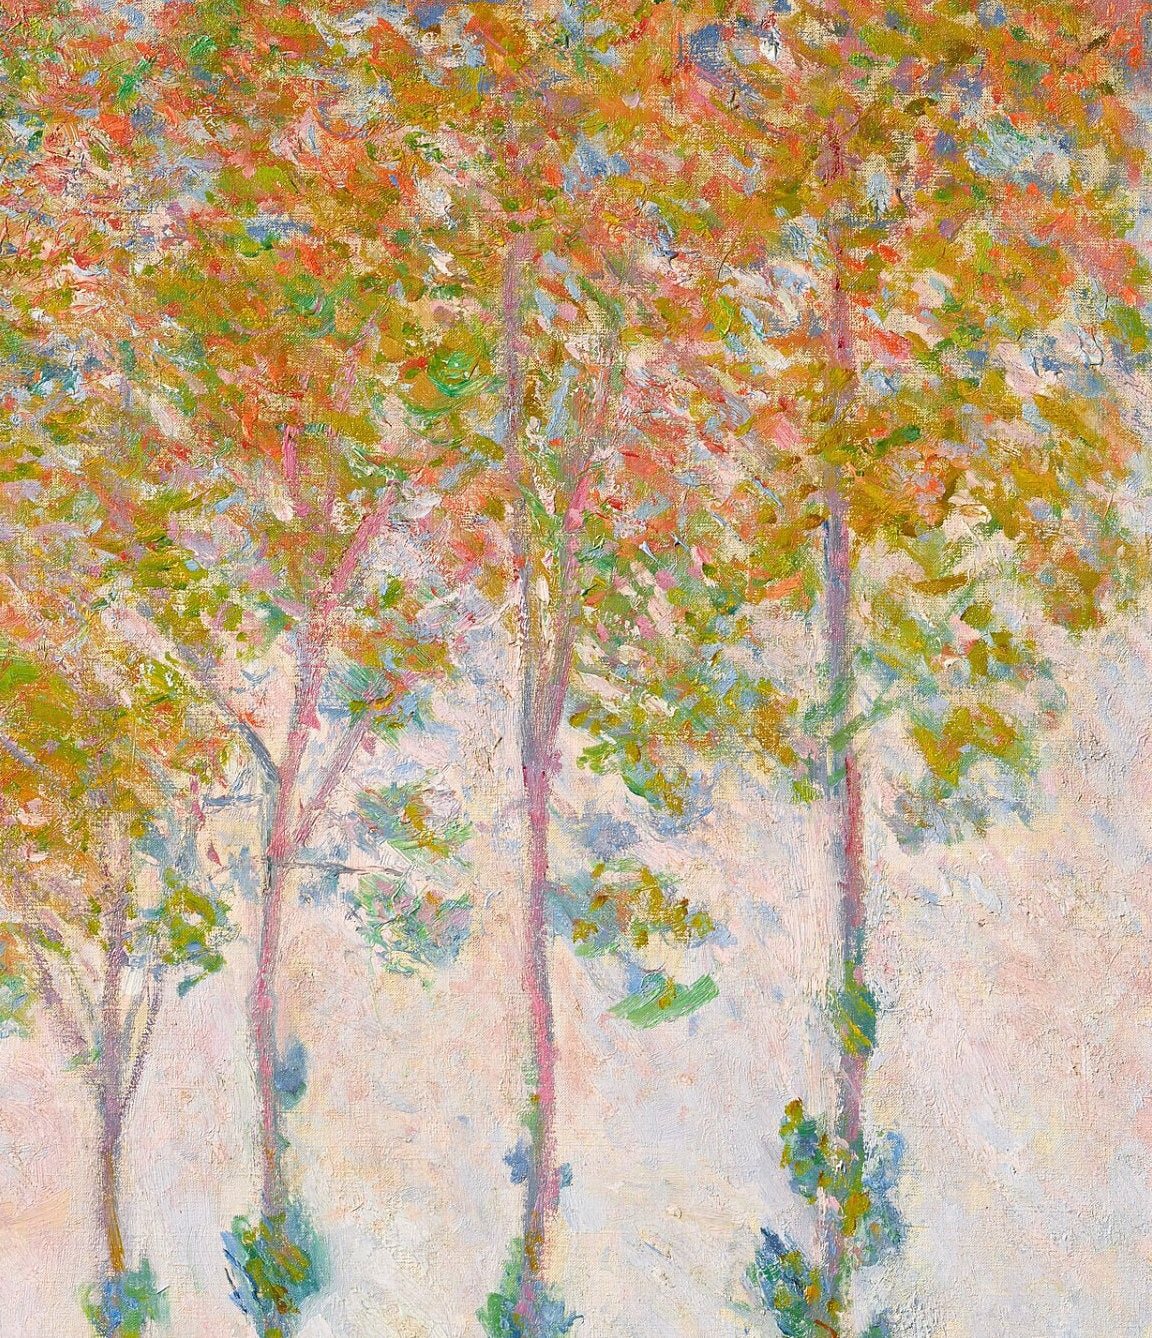 Peupliers au bord de l’Epte, automne by Claude Monet,3d Printed with texture and brush strokes looks like original oil-painting,code:625